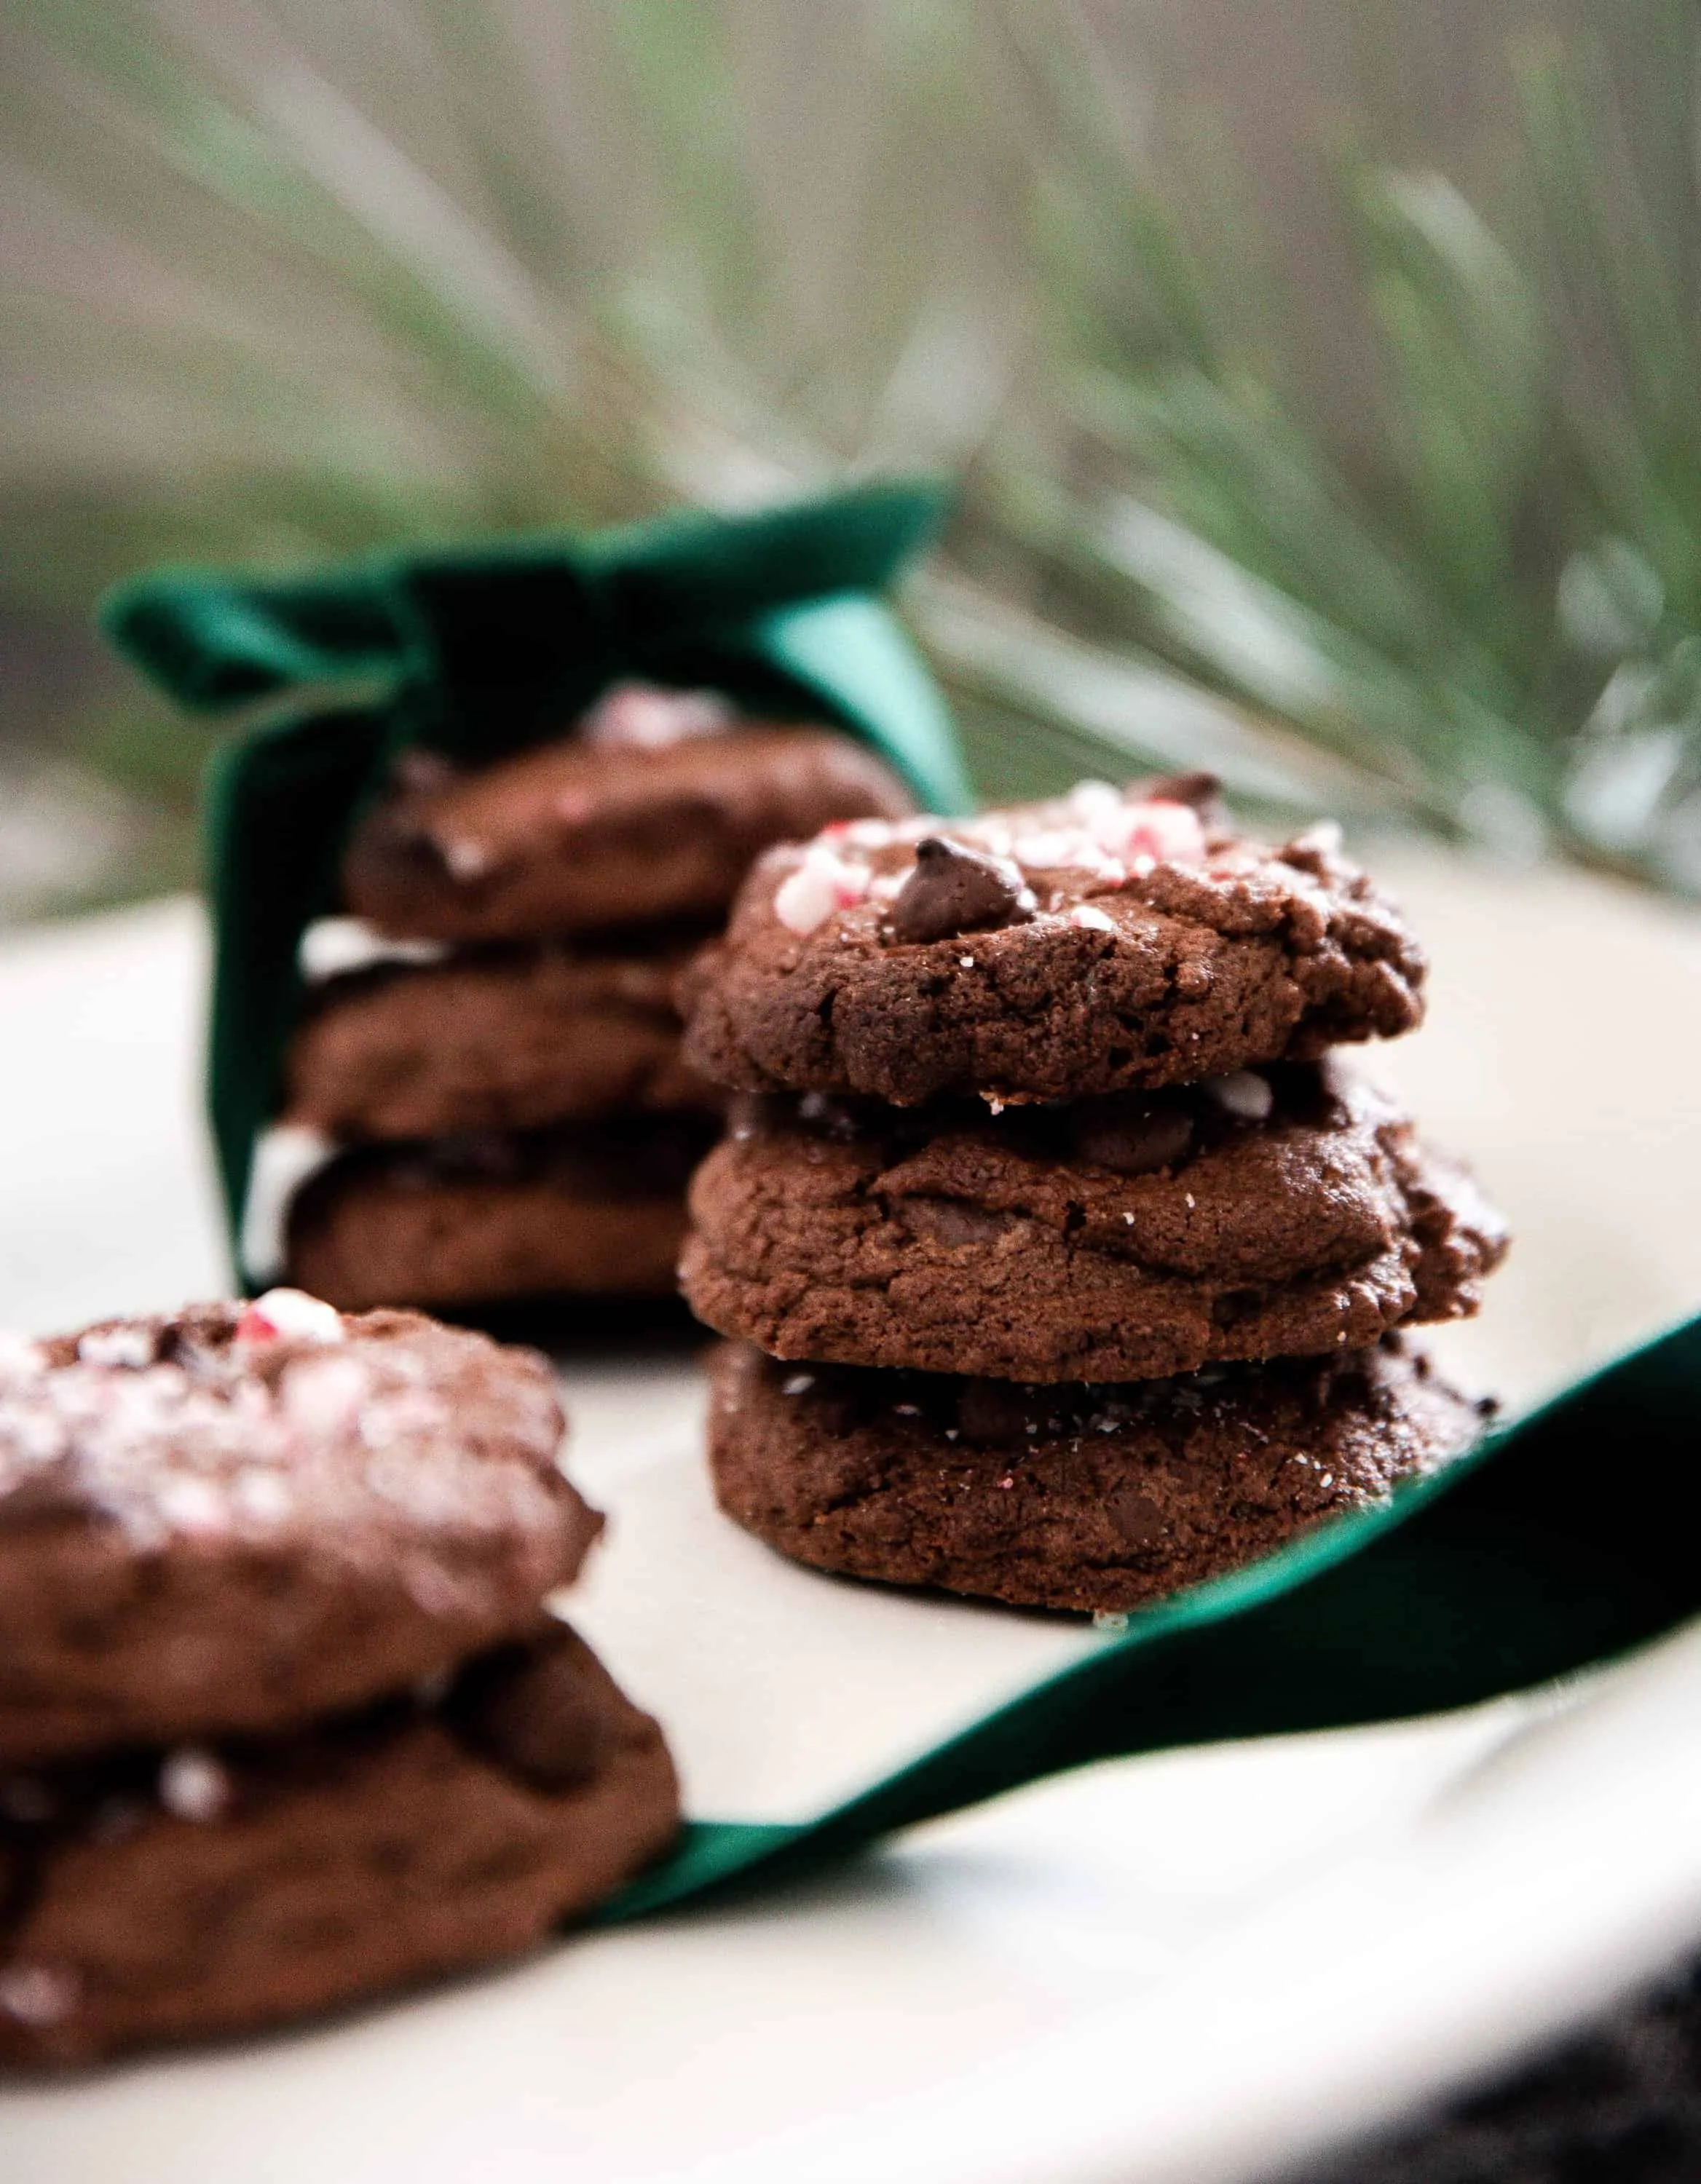 Chewy and delicious chocolate peppermint cookies are packed with cocoa powder, chocolate chips, peppermint extract, and crushed candy cane! There’s a burst of Christmas flavor in every bite!